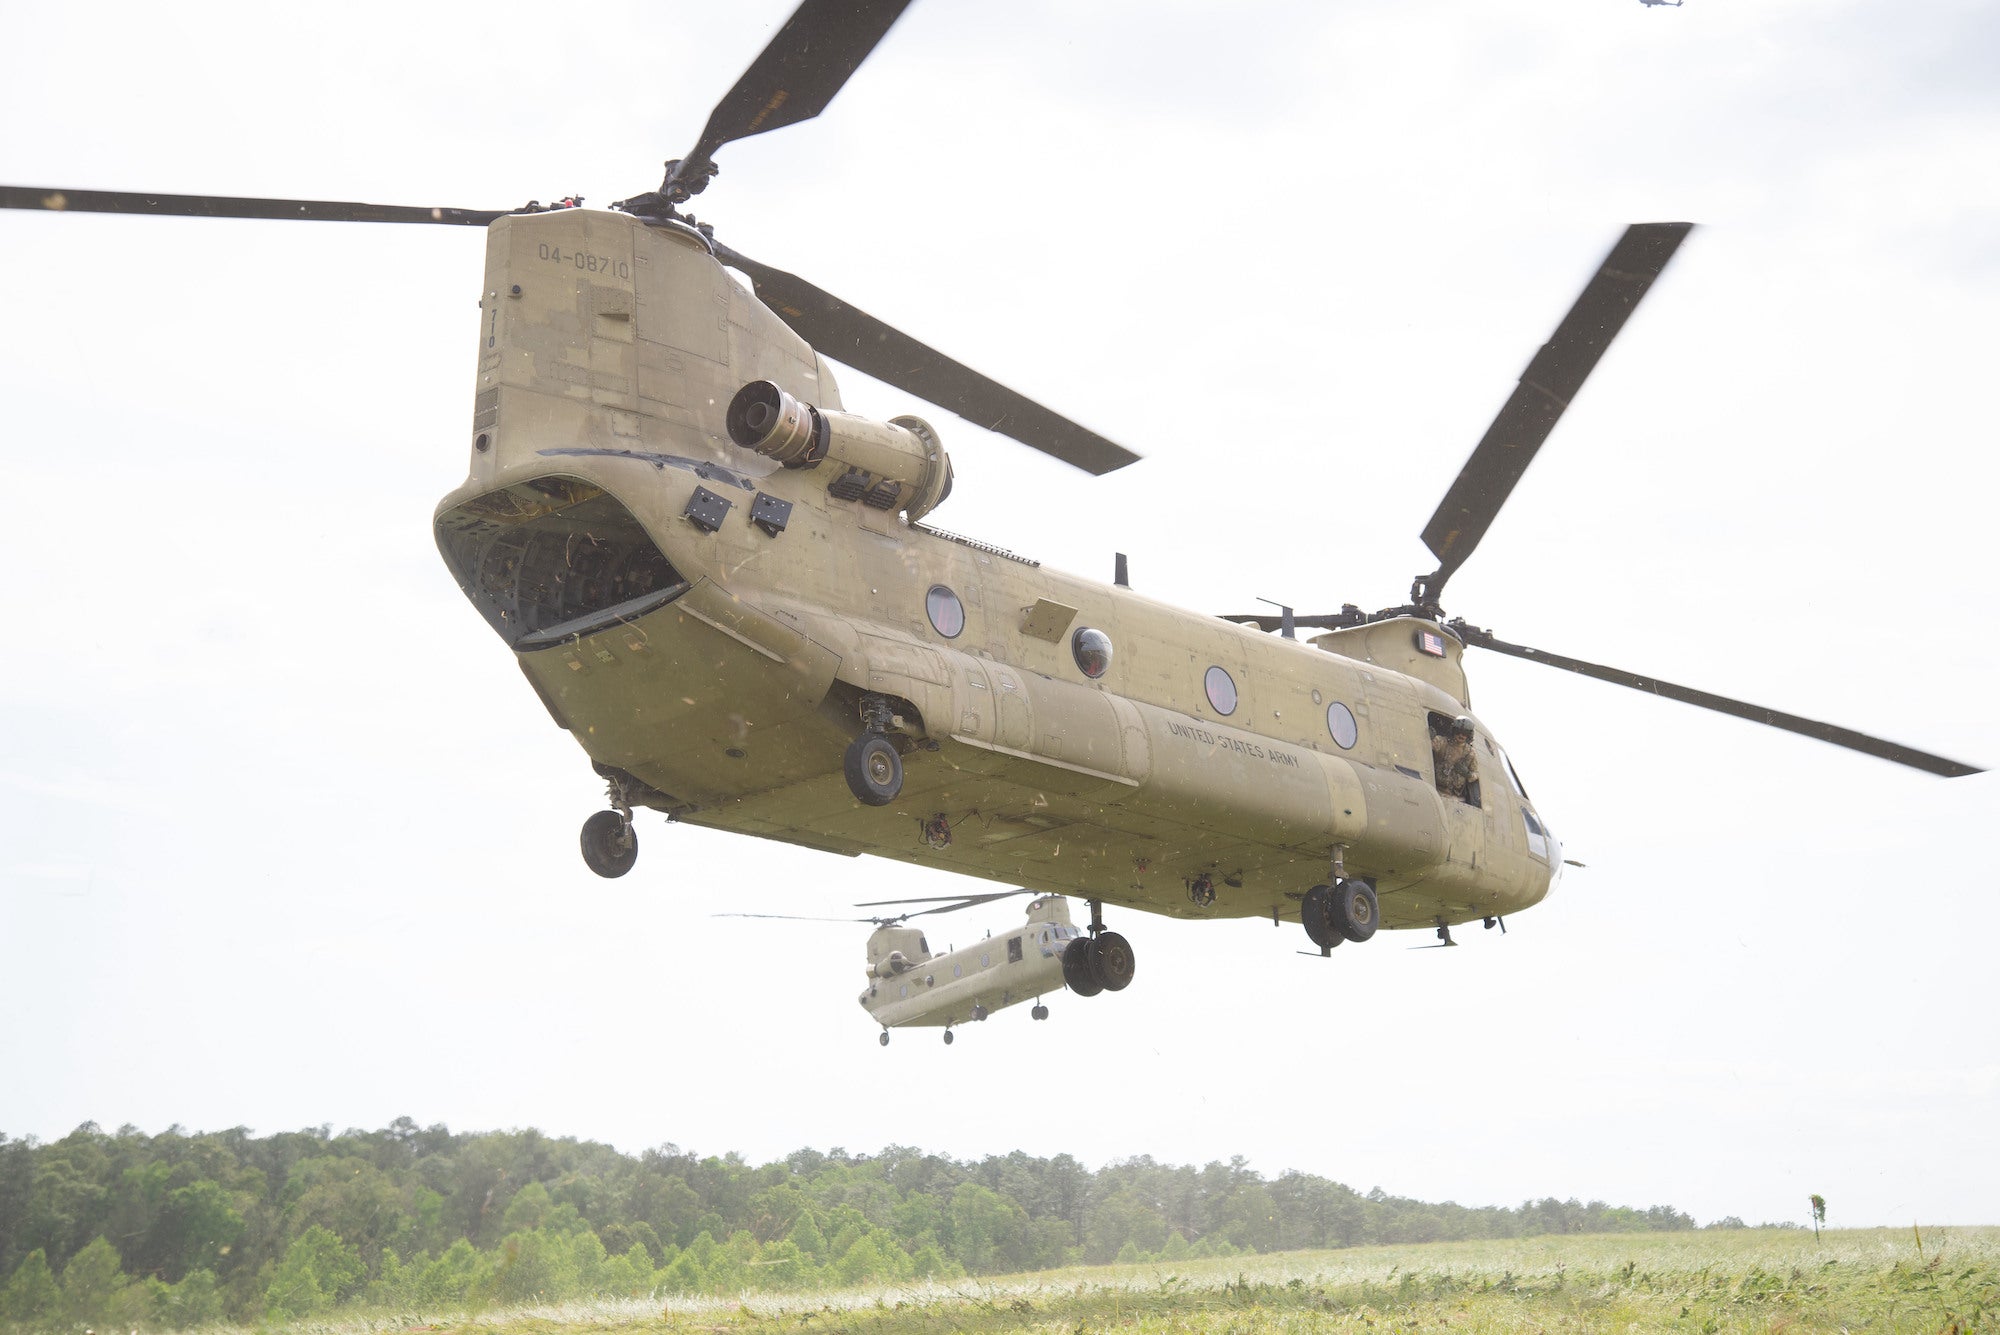 Two Chinooks in April in Mississippi.